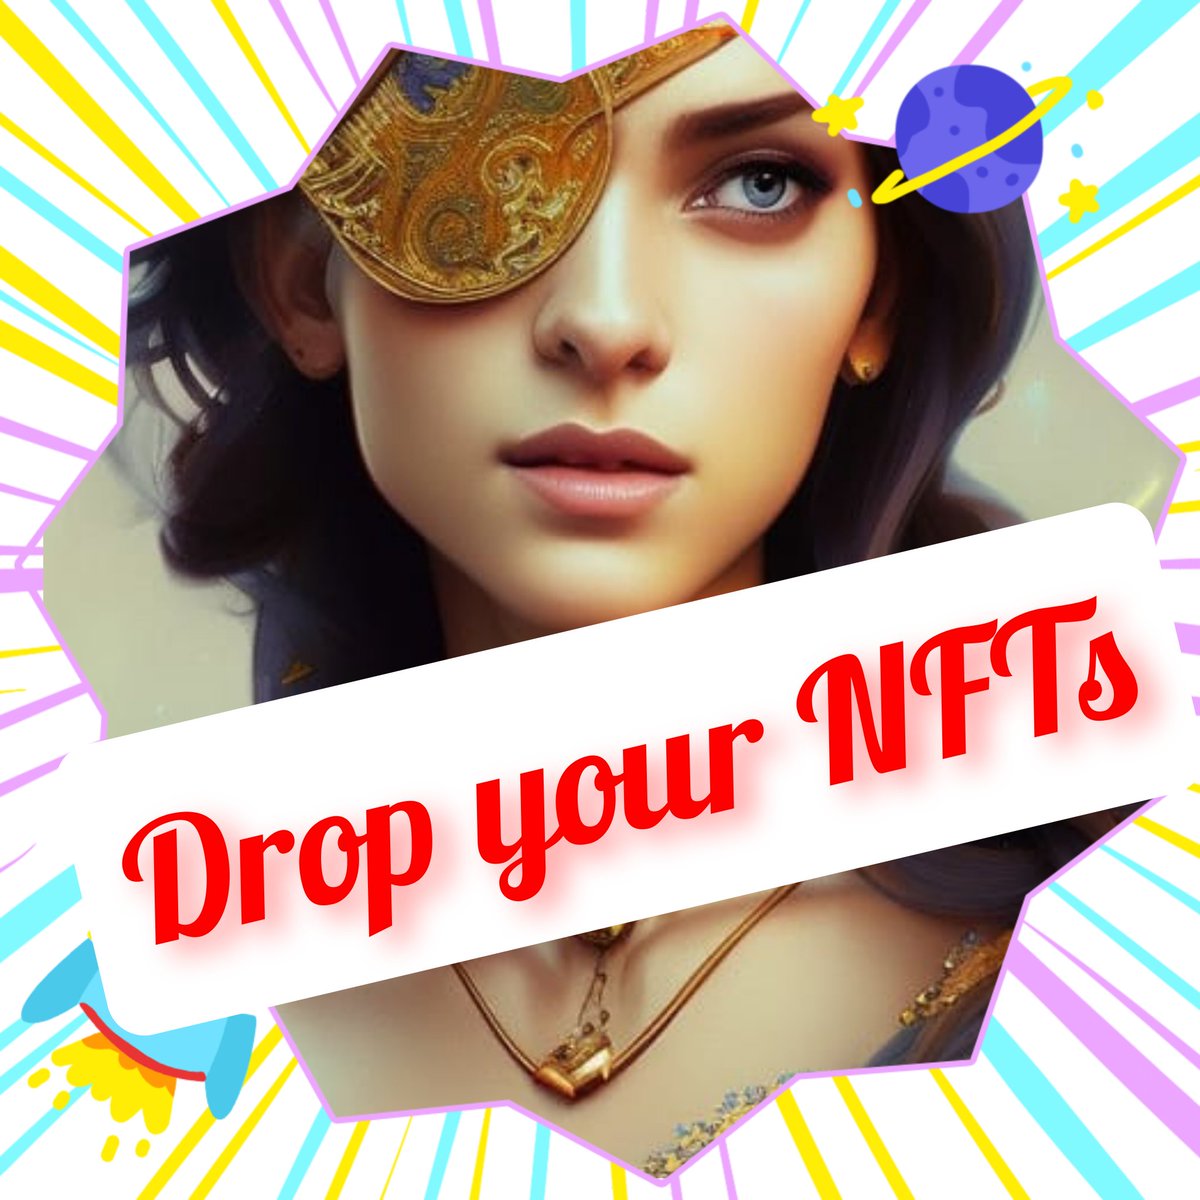 Drop your unsold NFTs 👇
Buying From Followers 👇

#ETH #XTZ #MATIC #BTC 
#SupportEachOthers